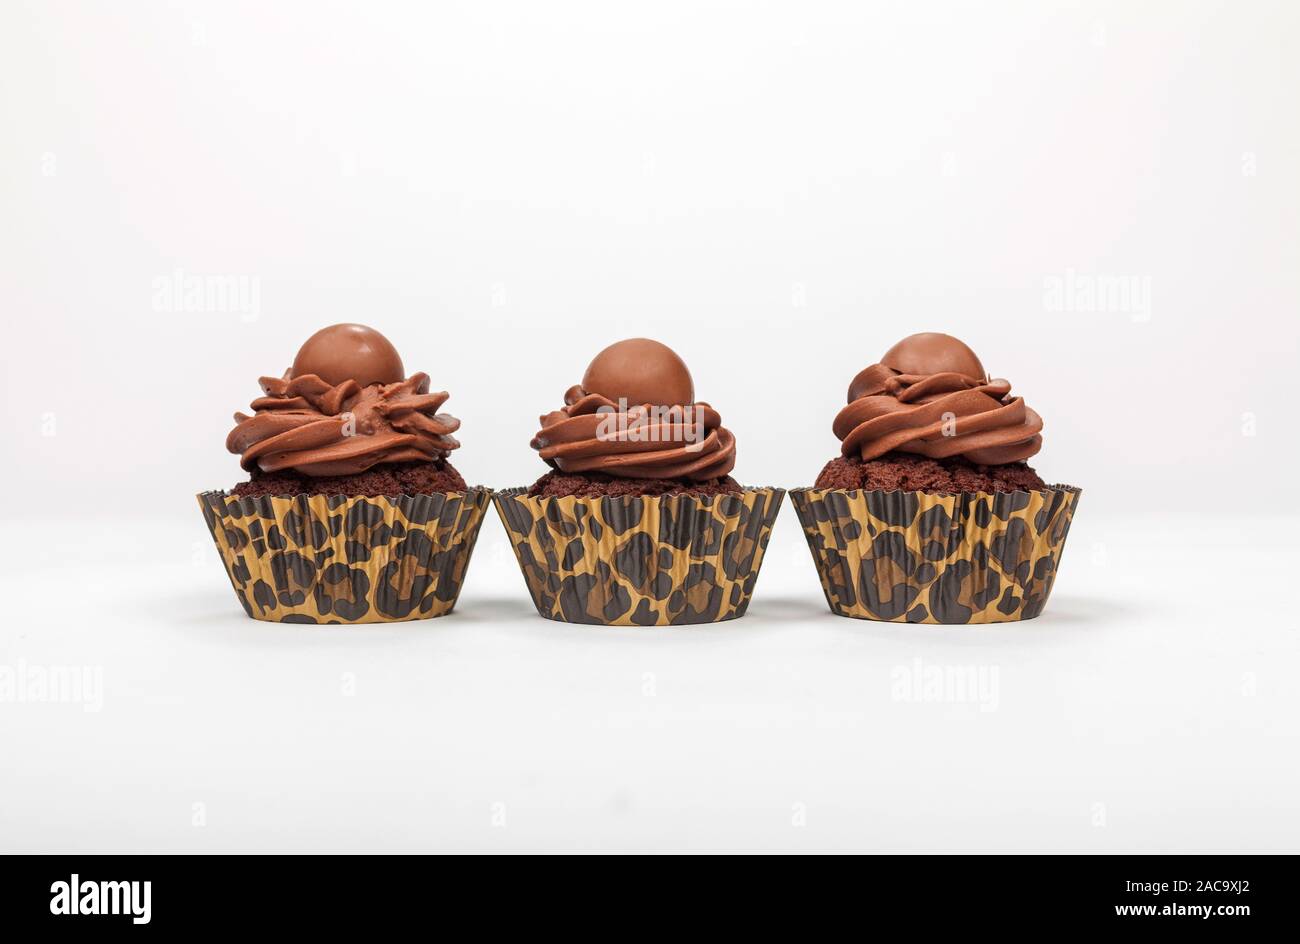 Three chocolate cup cakes with icing and leopard print cases photographed in a row on a white background Stock Photo